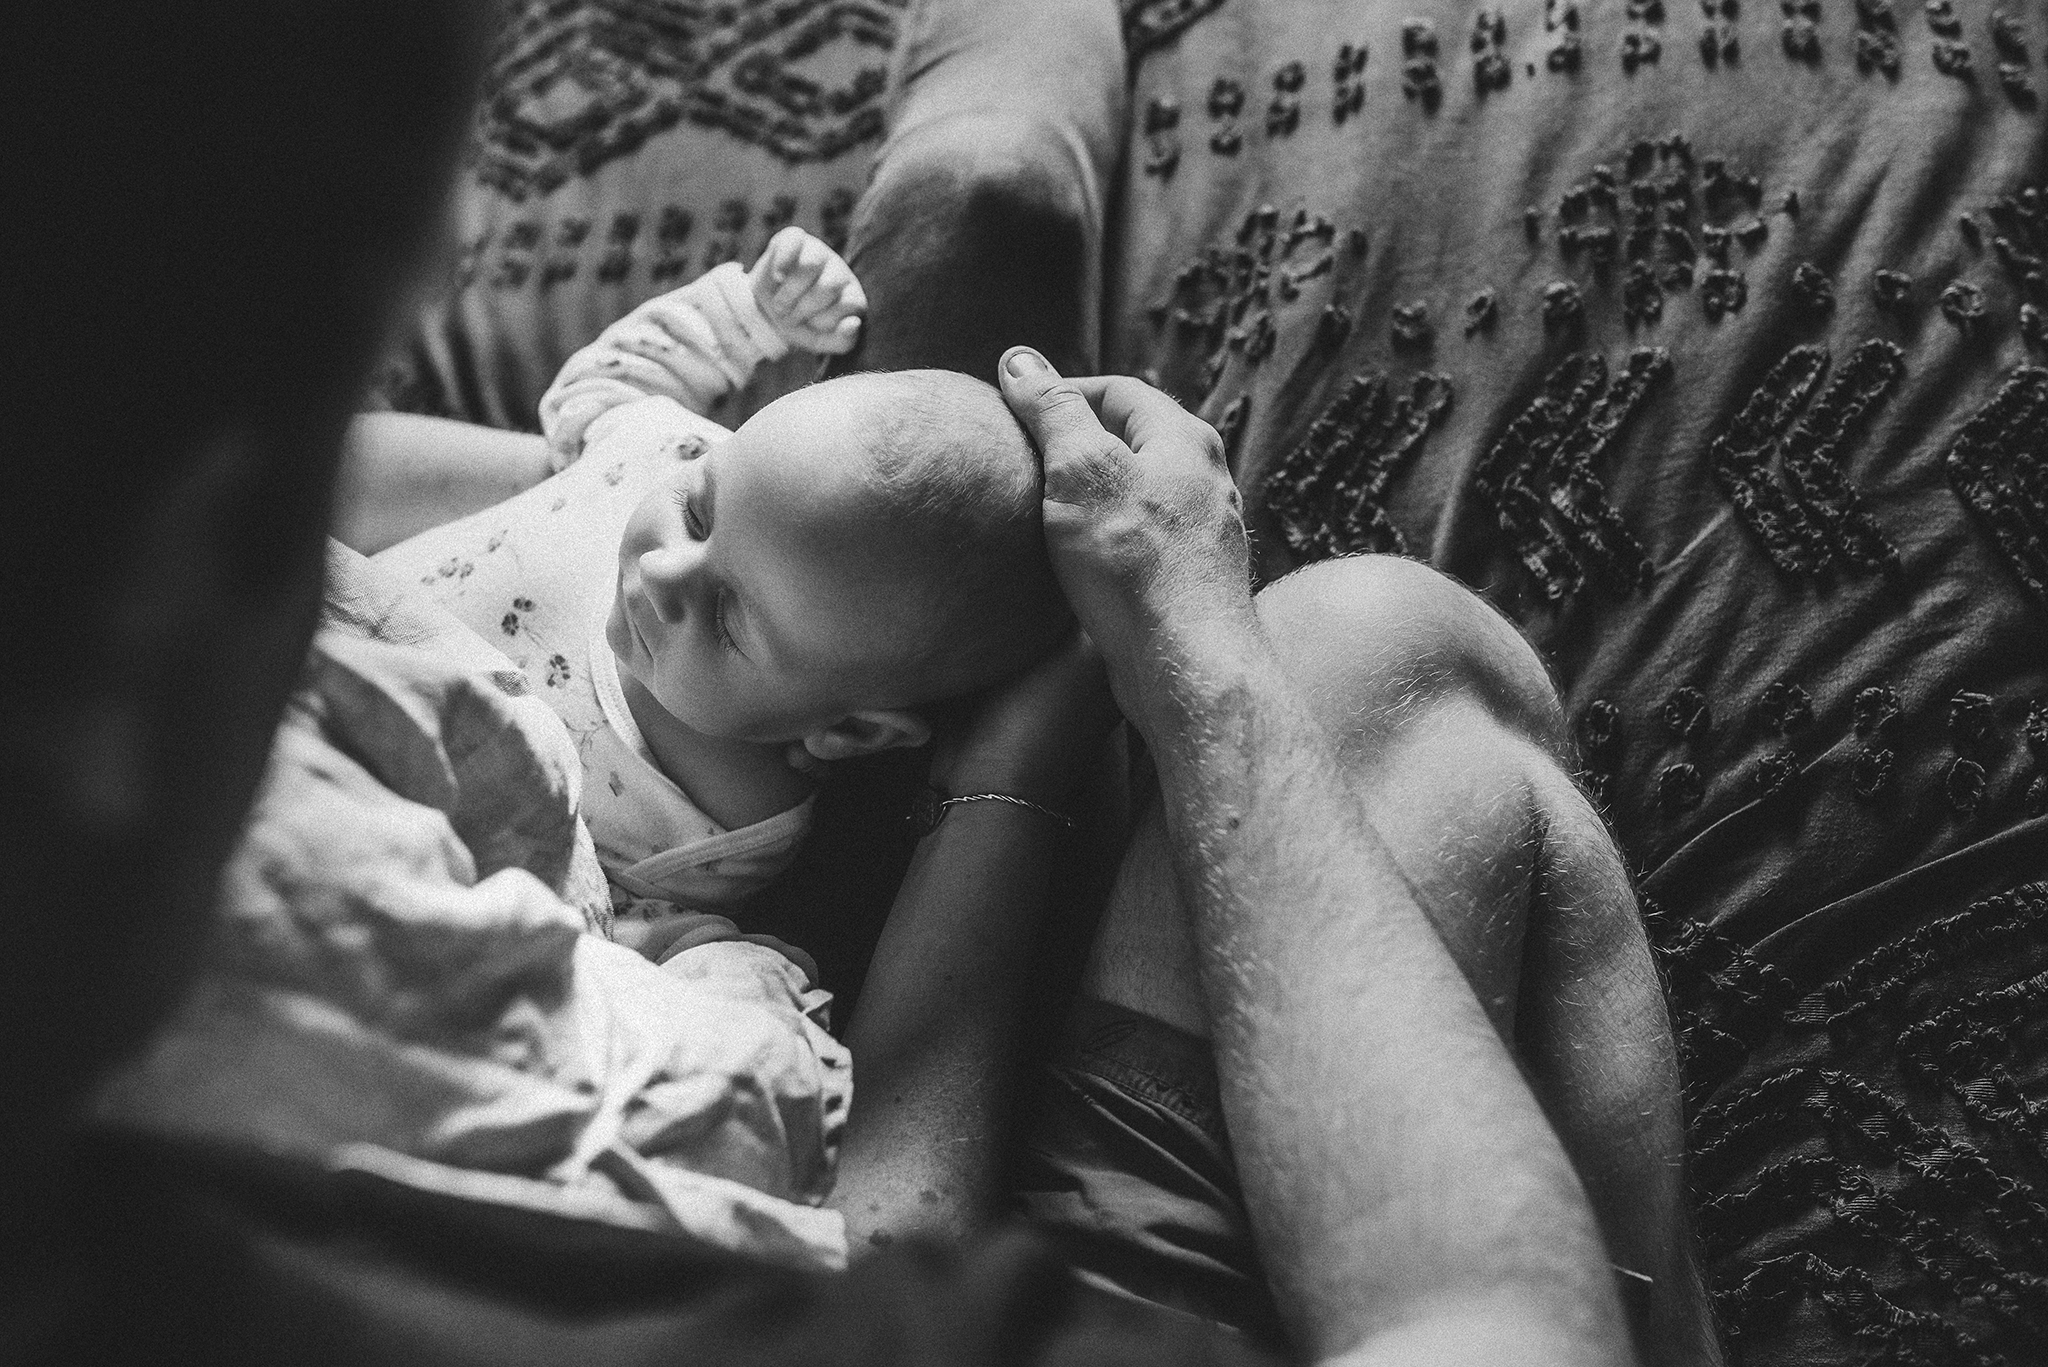 A black and white newborn image, looking over the shoulder of a mum and dad, down towards the sleeping baby cradled in their arms.